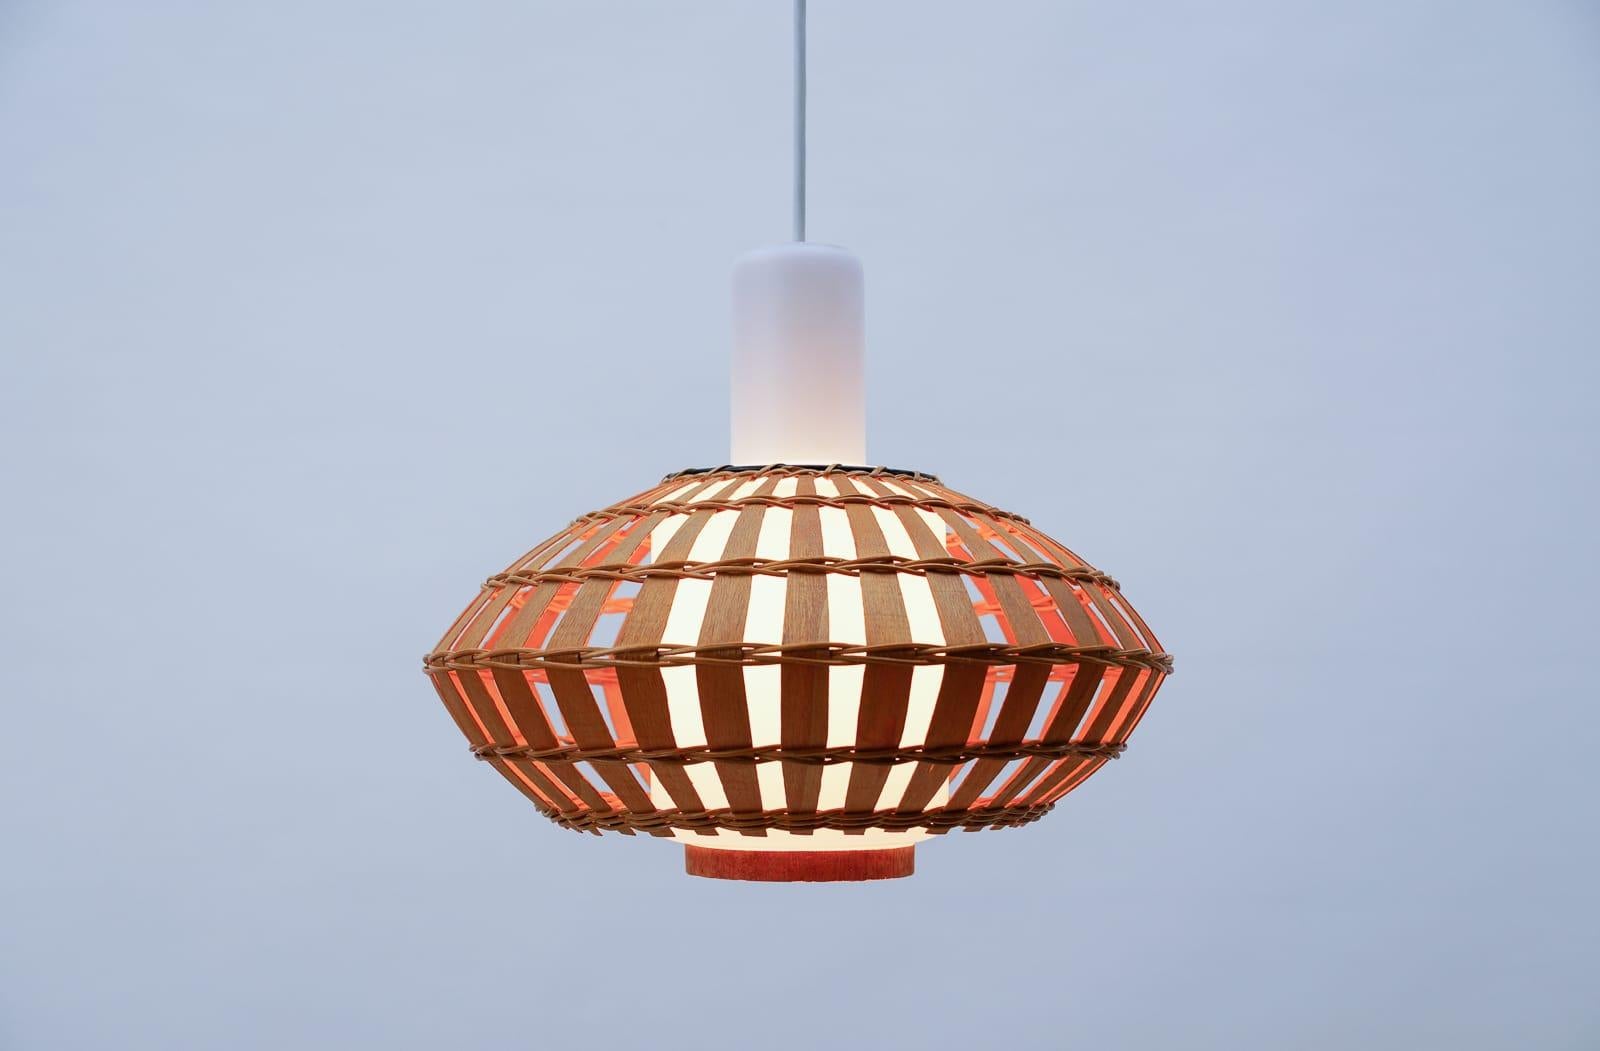 Opaline glass and wicker ceiling lamp, 1960s.

Fully functional.

With an E27 socket. Works with 220V and 110V.

Wiring is suitable for all countries.